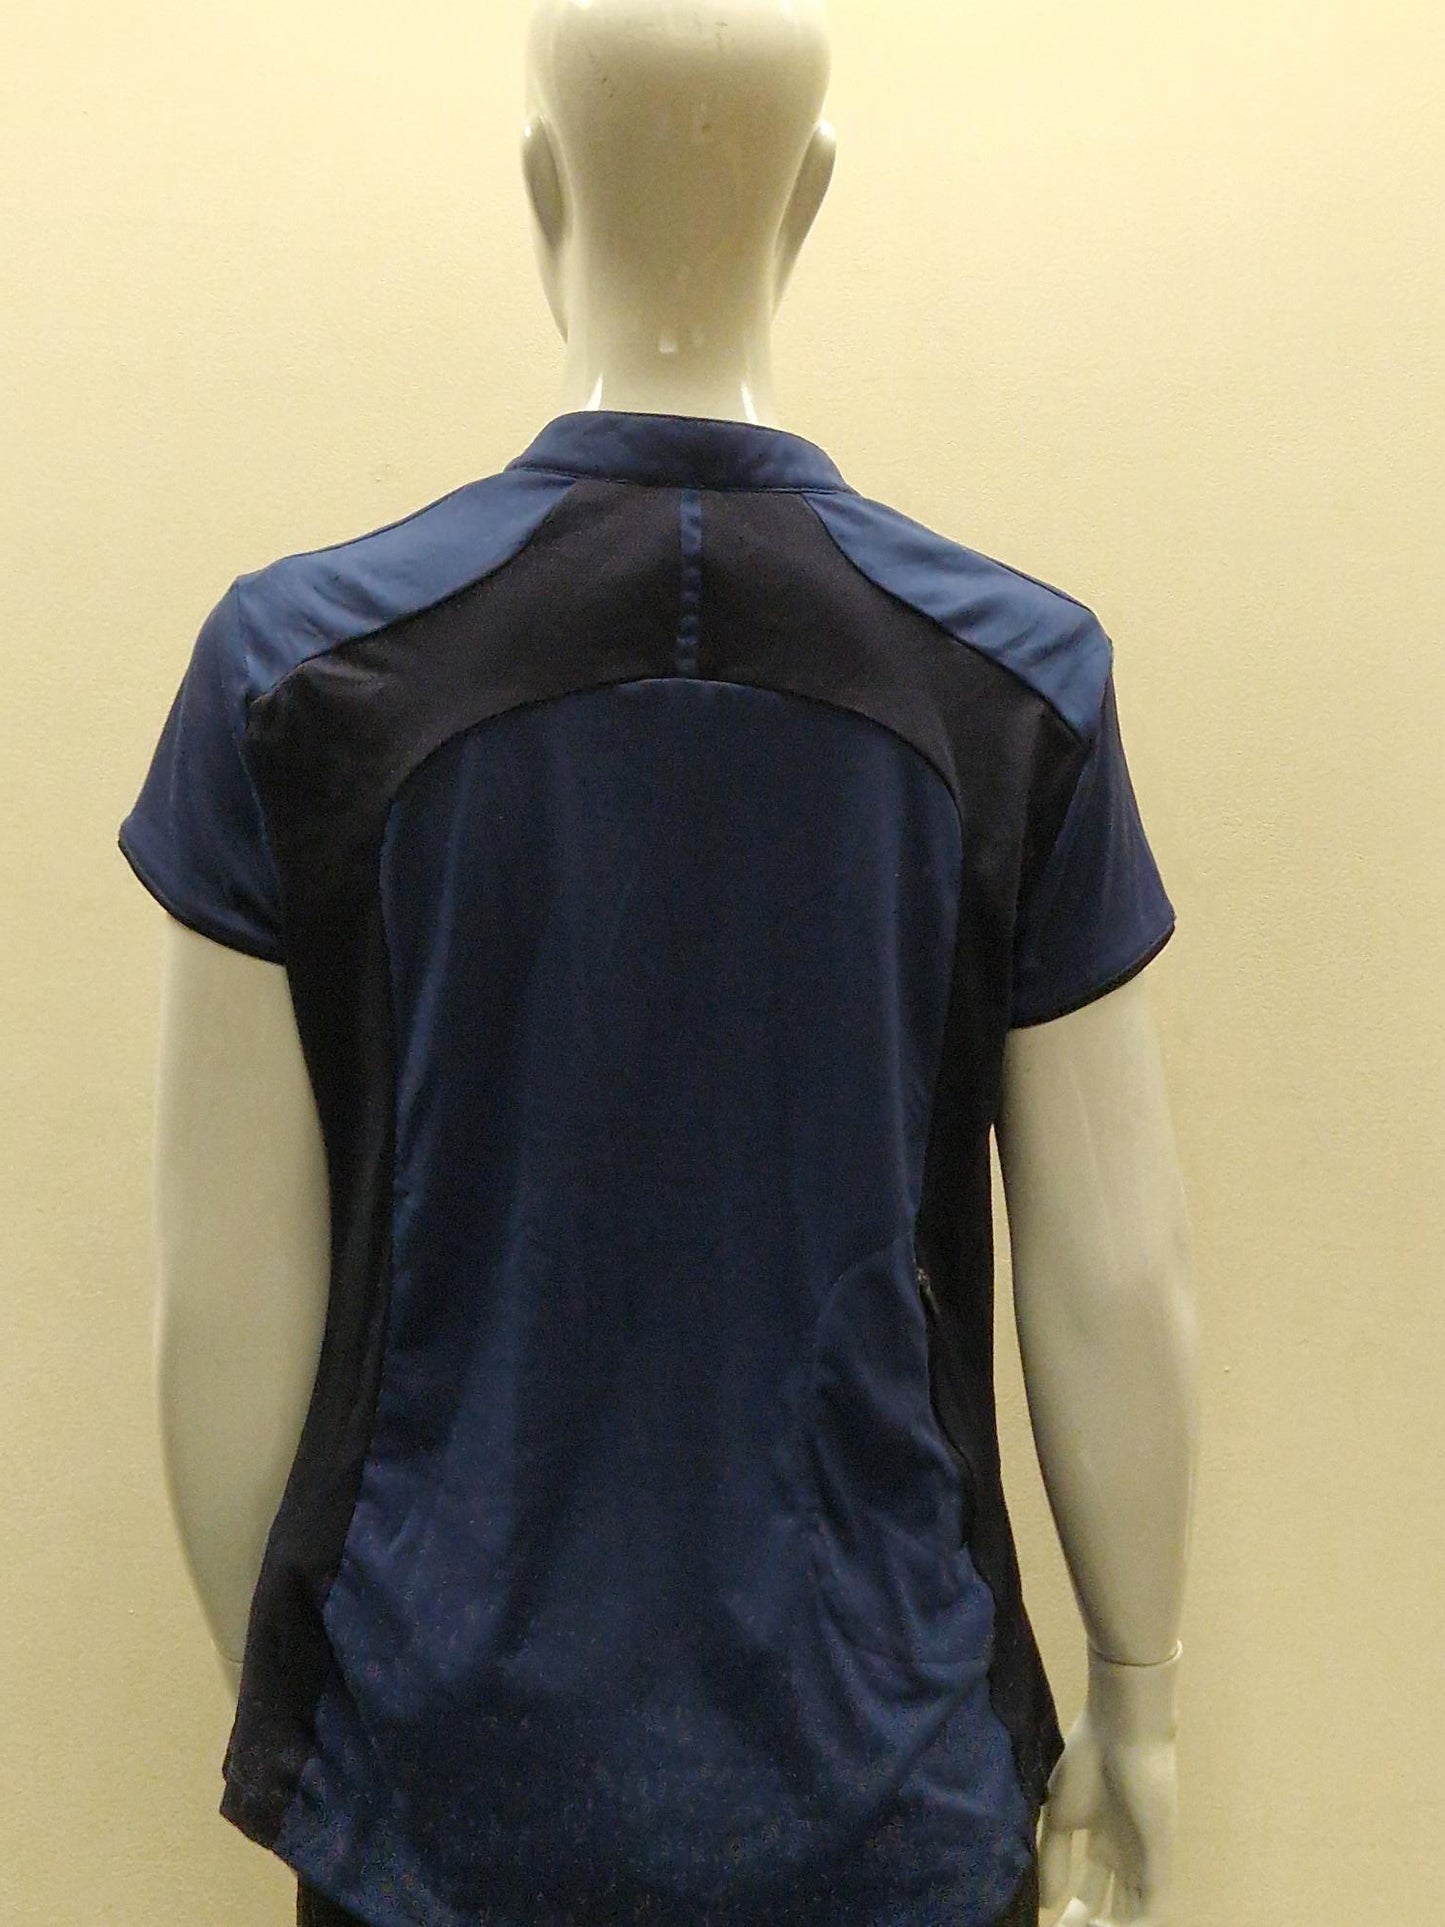 Decathlon Ladies T-Shirt in Navy Blue - Size Large